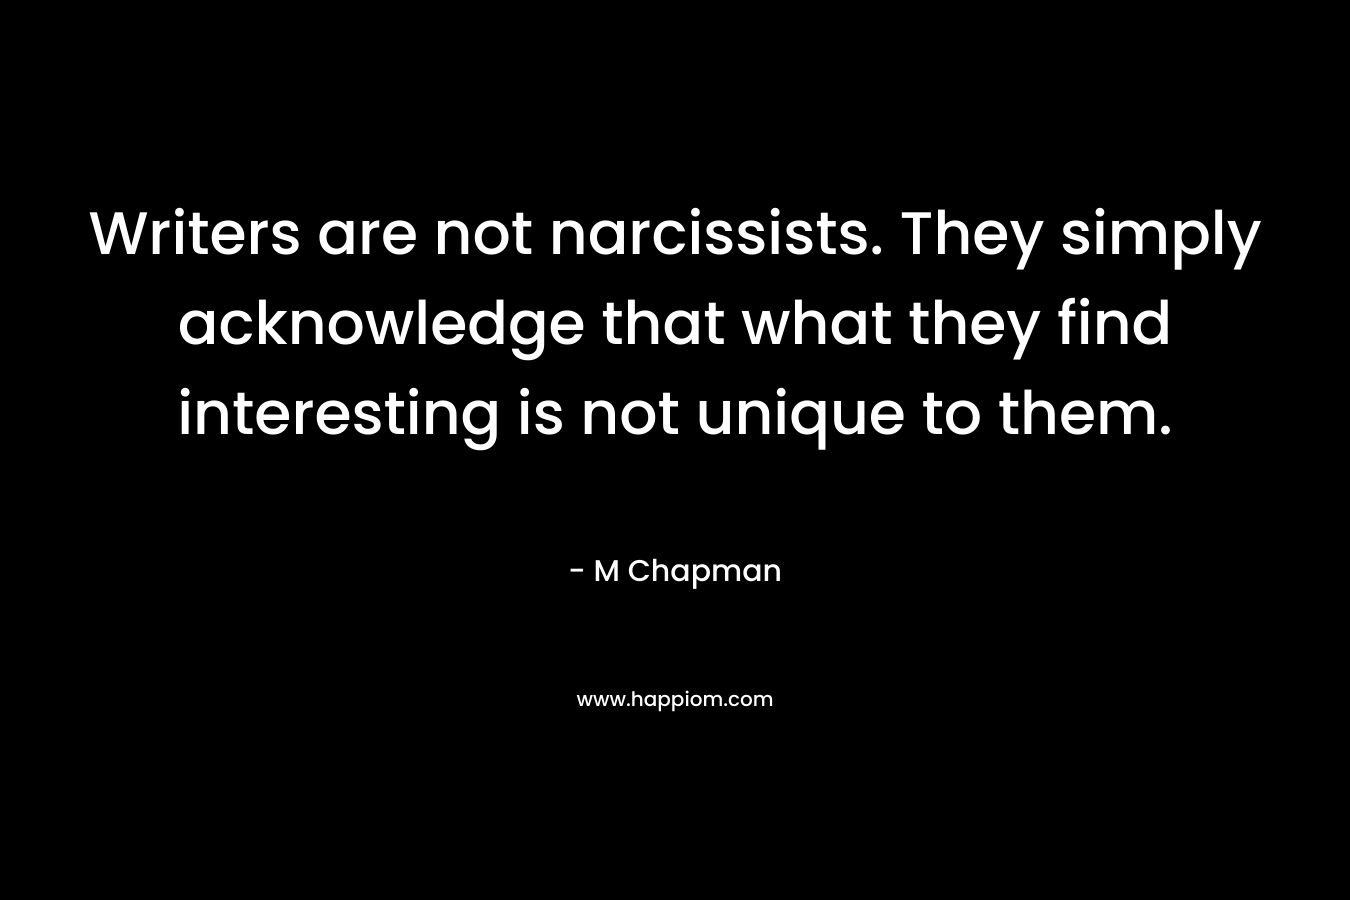 Writers are not narcissists. They simply acknowledge that what they find interesting is not unique to them. – M Chapman